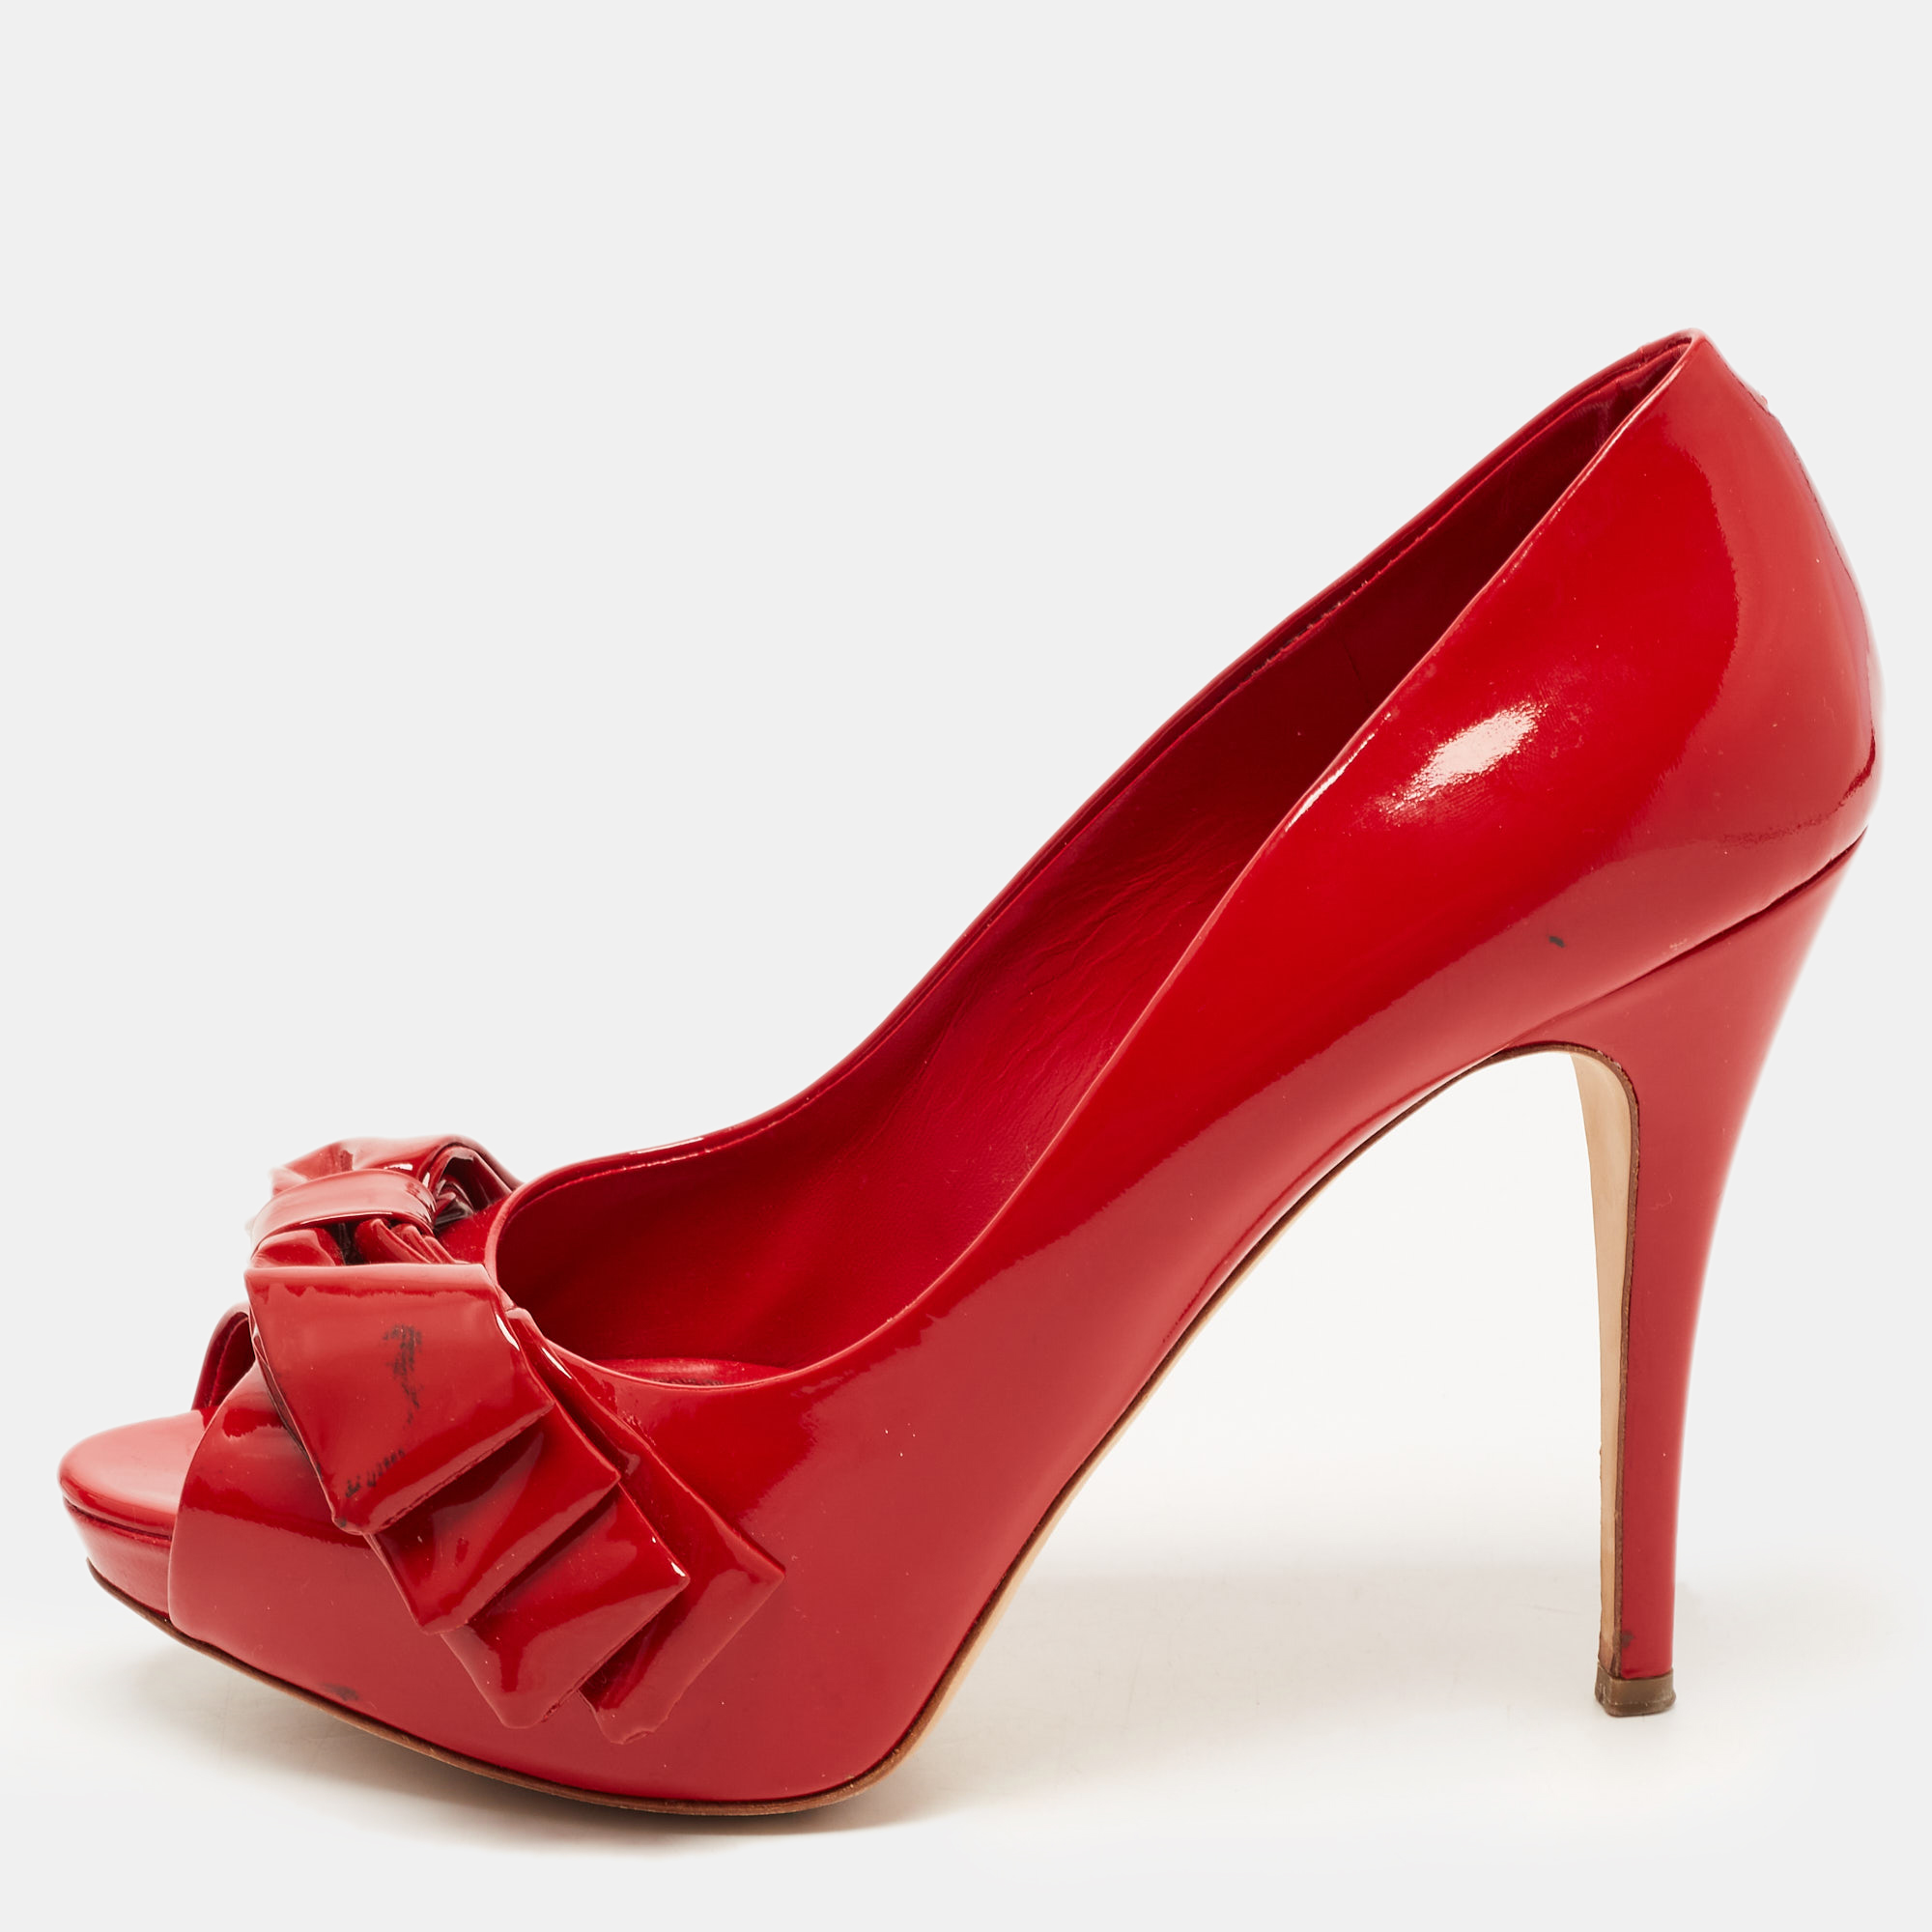 

Dolce & Gabbana Red Patent Leather Bow Peep Toe Pumps Size